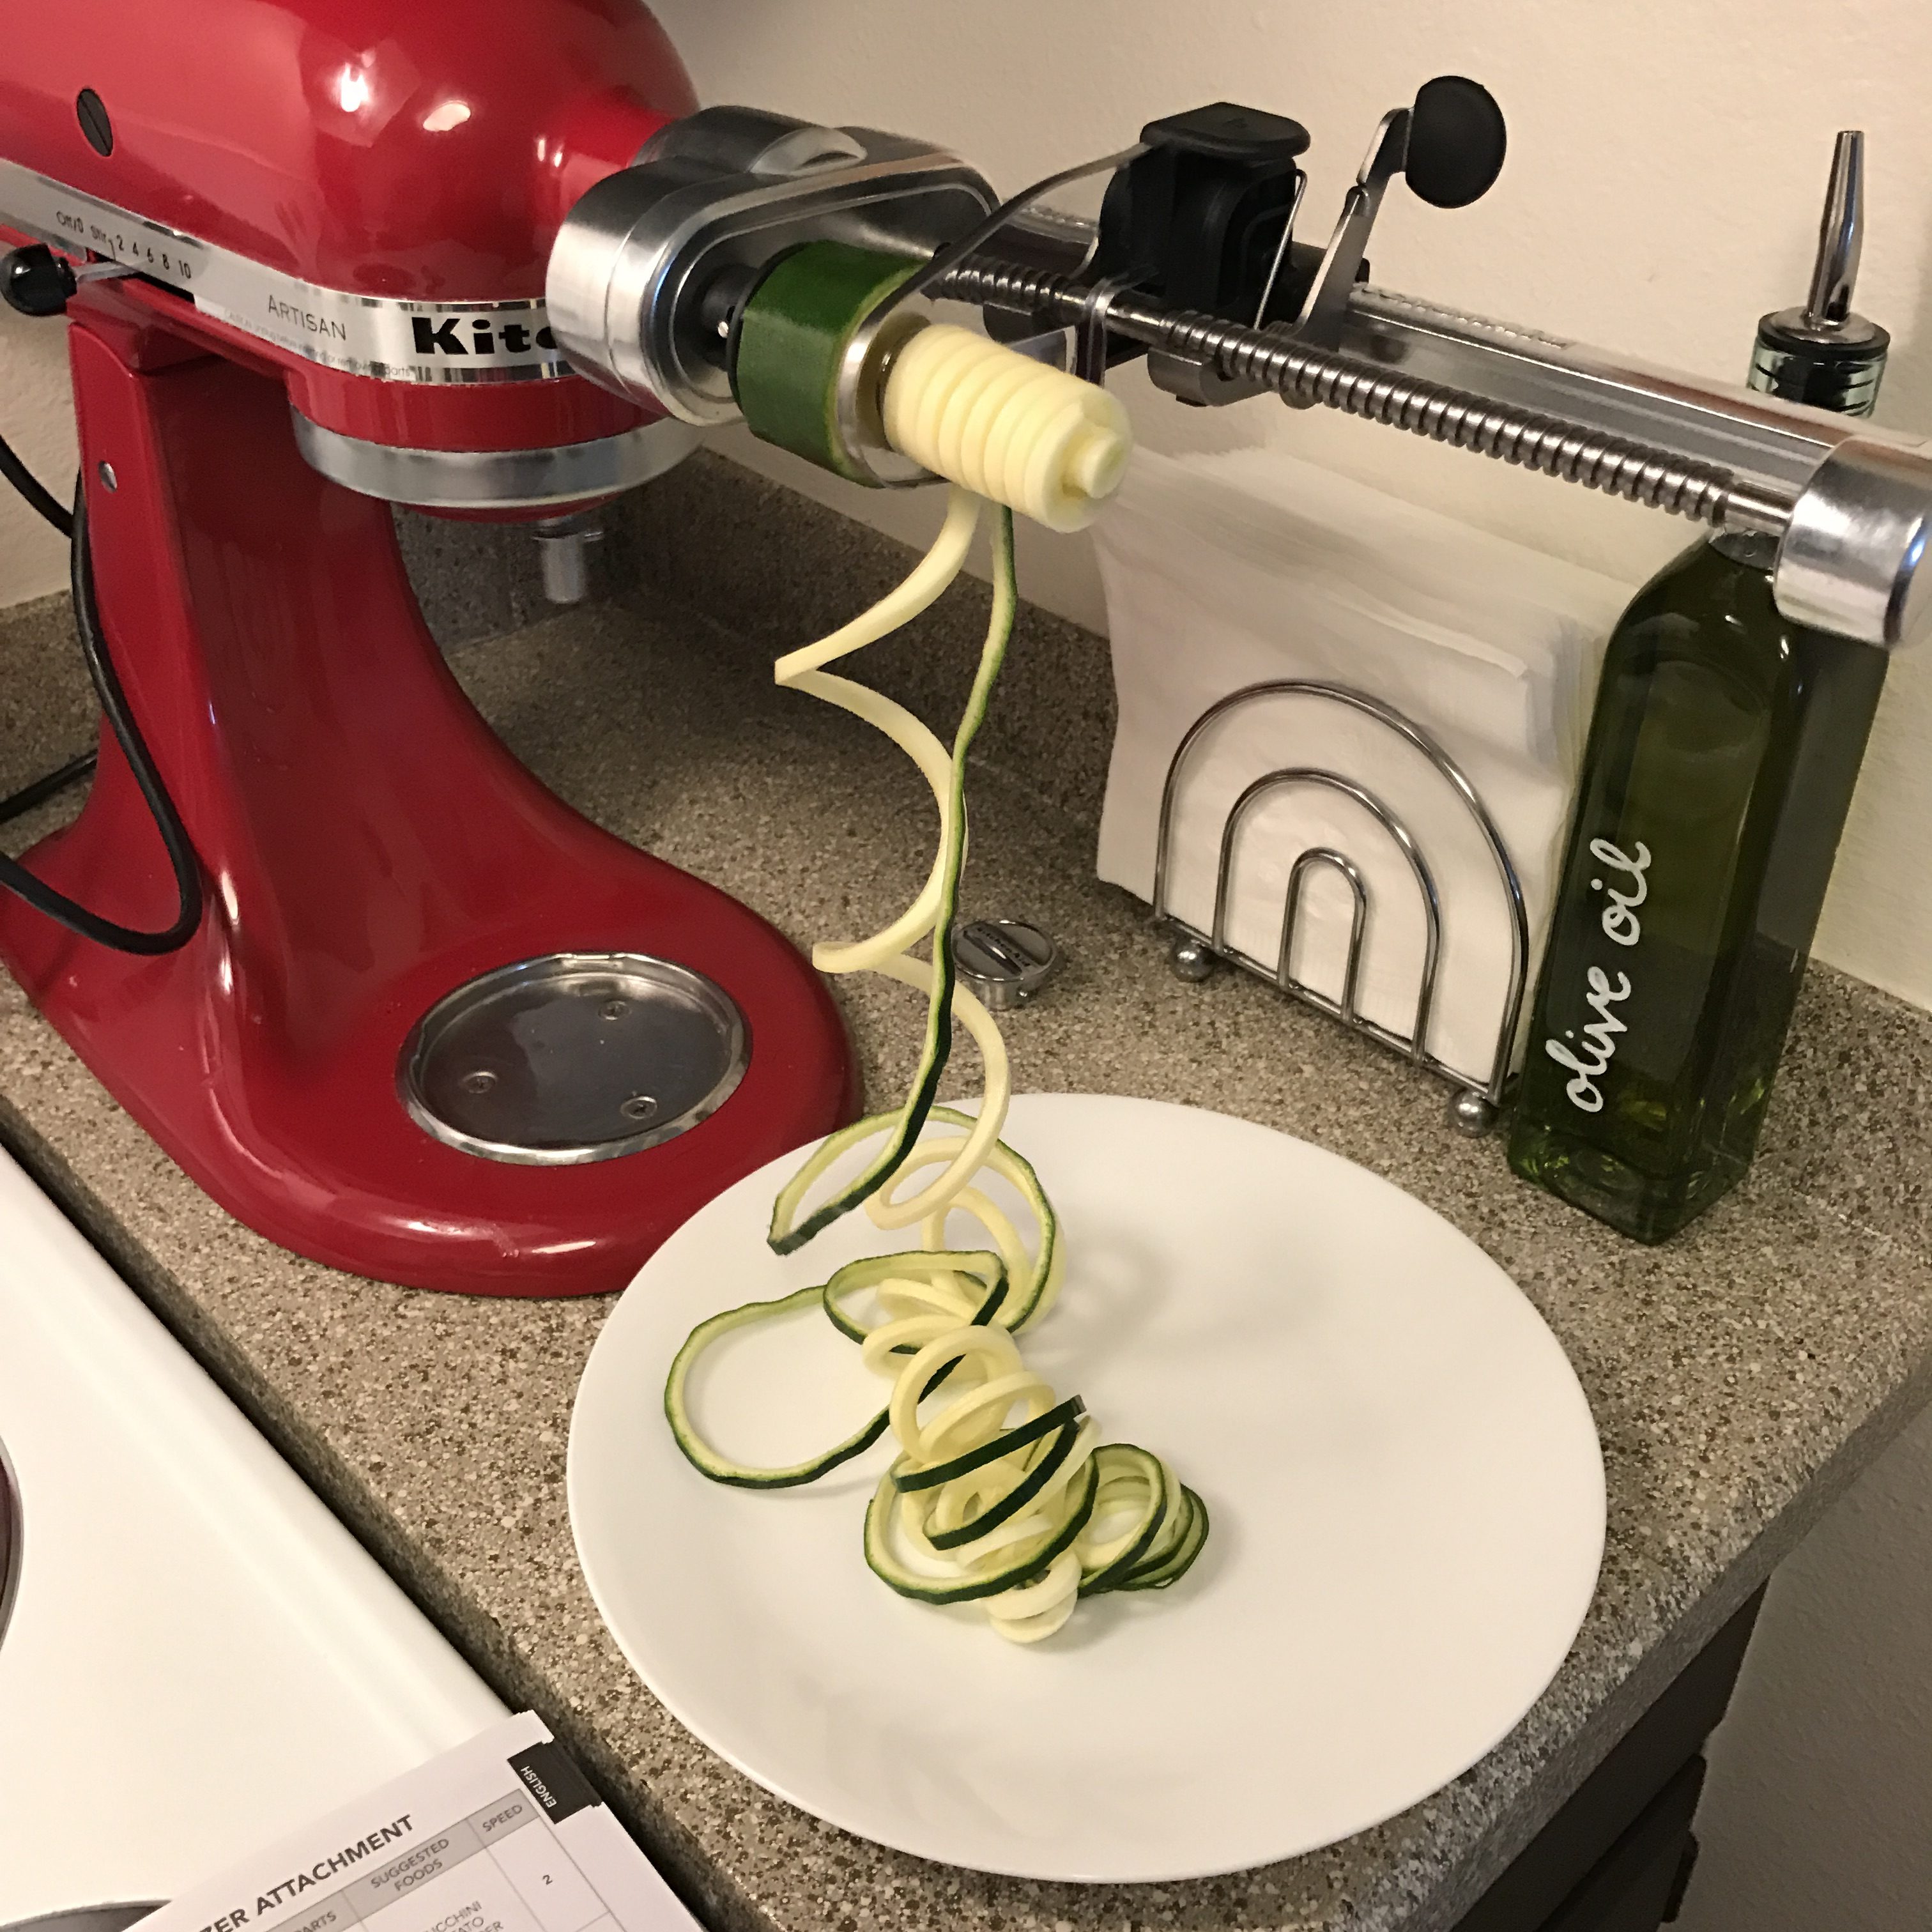 How to Make Zoodles with a KitchenAid Food Processor